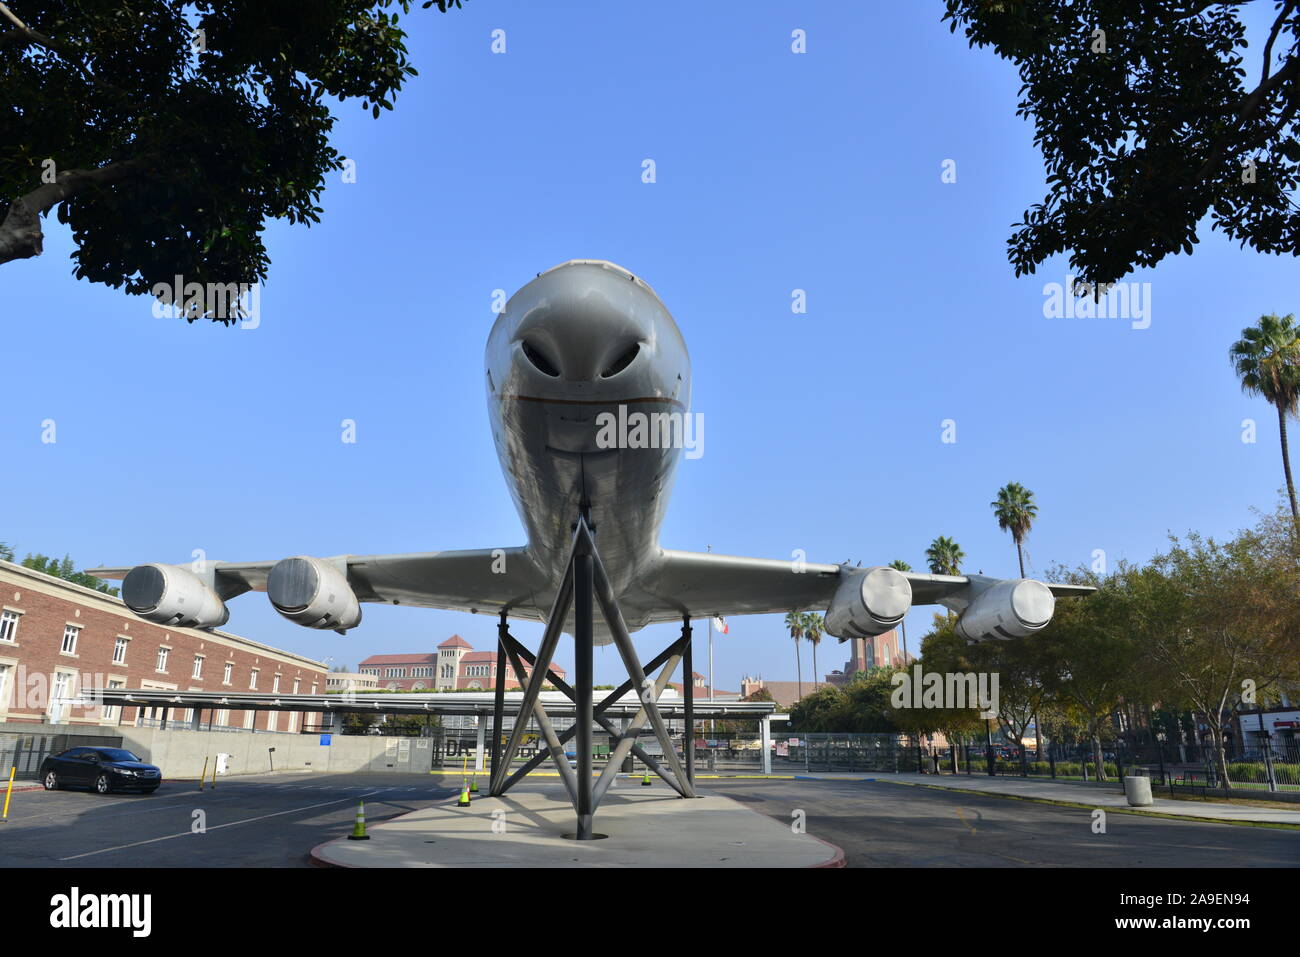 A Douglas DC-8 on display in Los Angeles Stock Photo